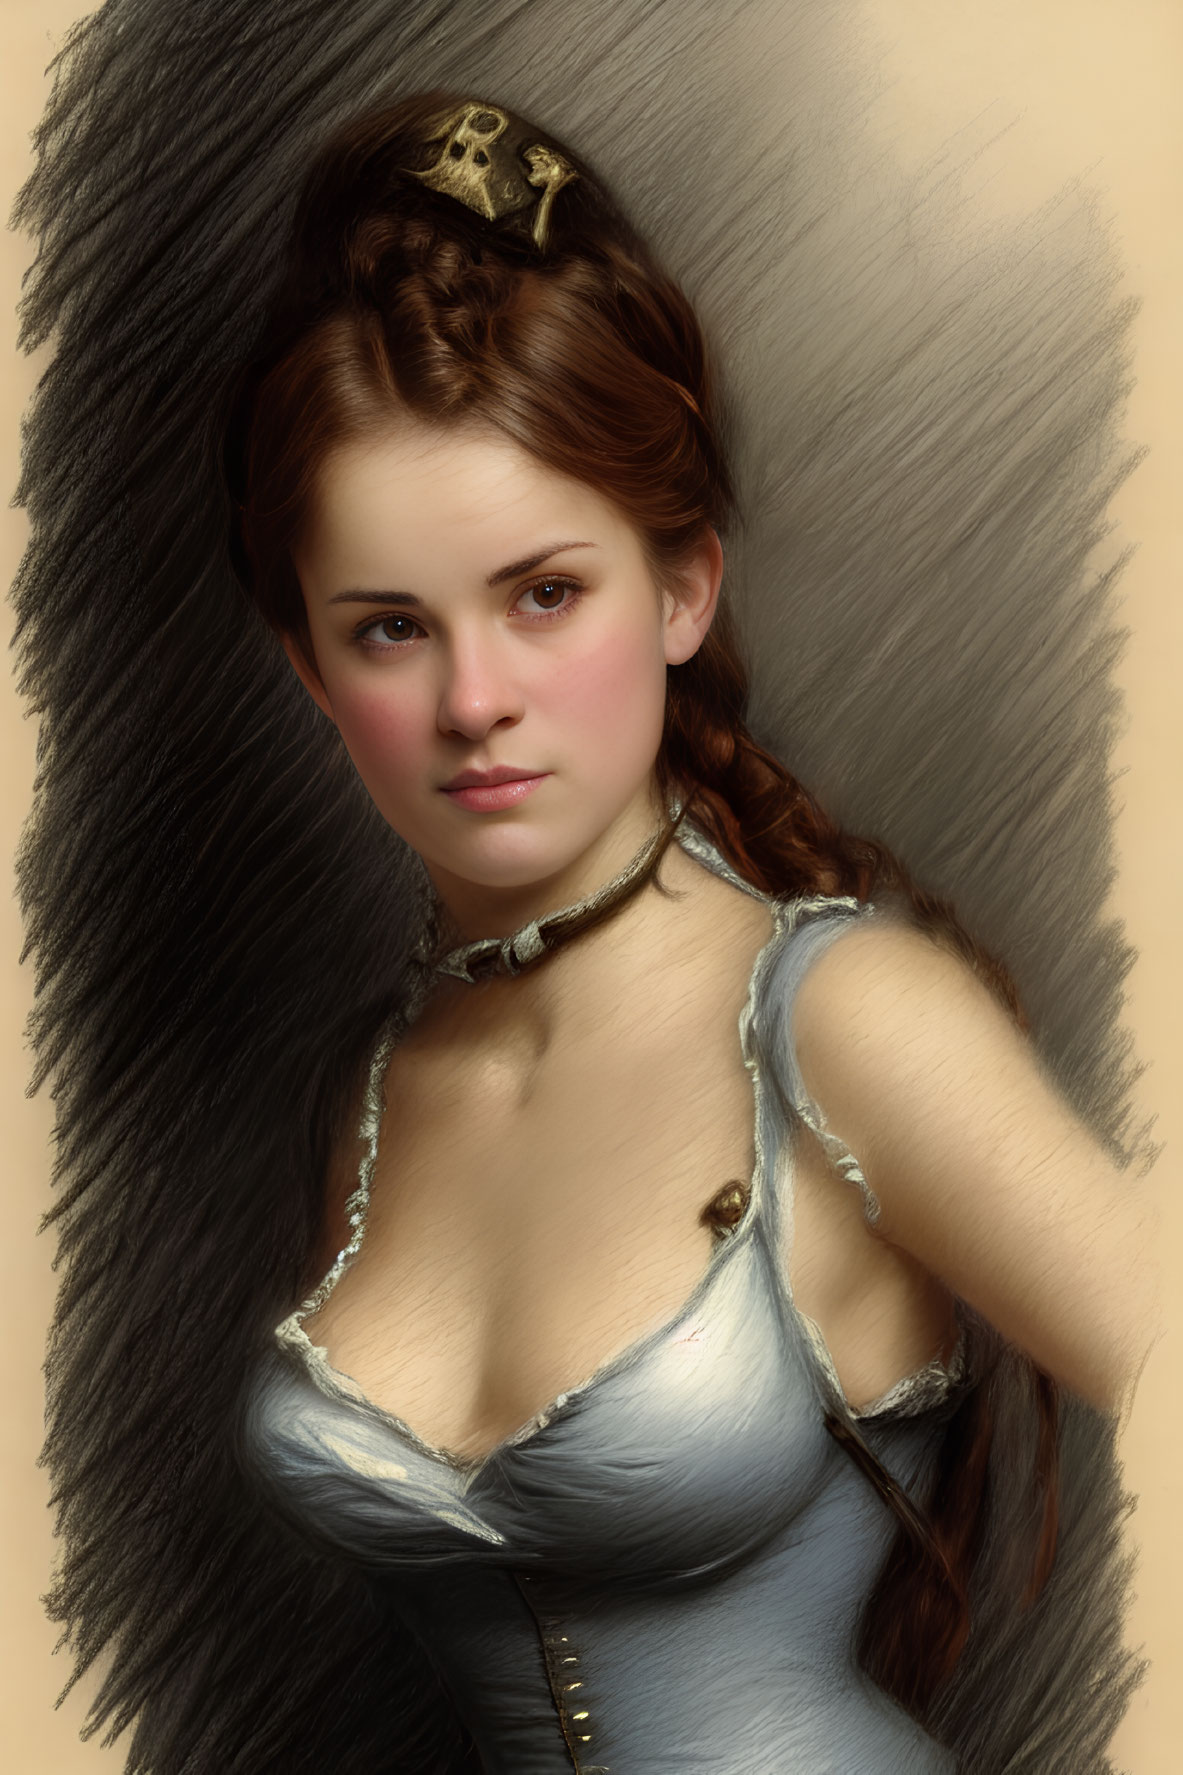 Portrait of Woman with Auburn Hair, Blue-Gray Corset, Necklace on Beige Background